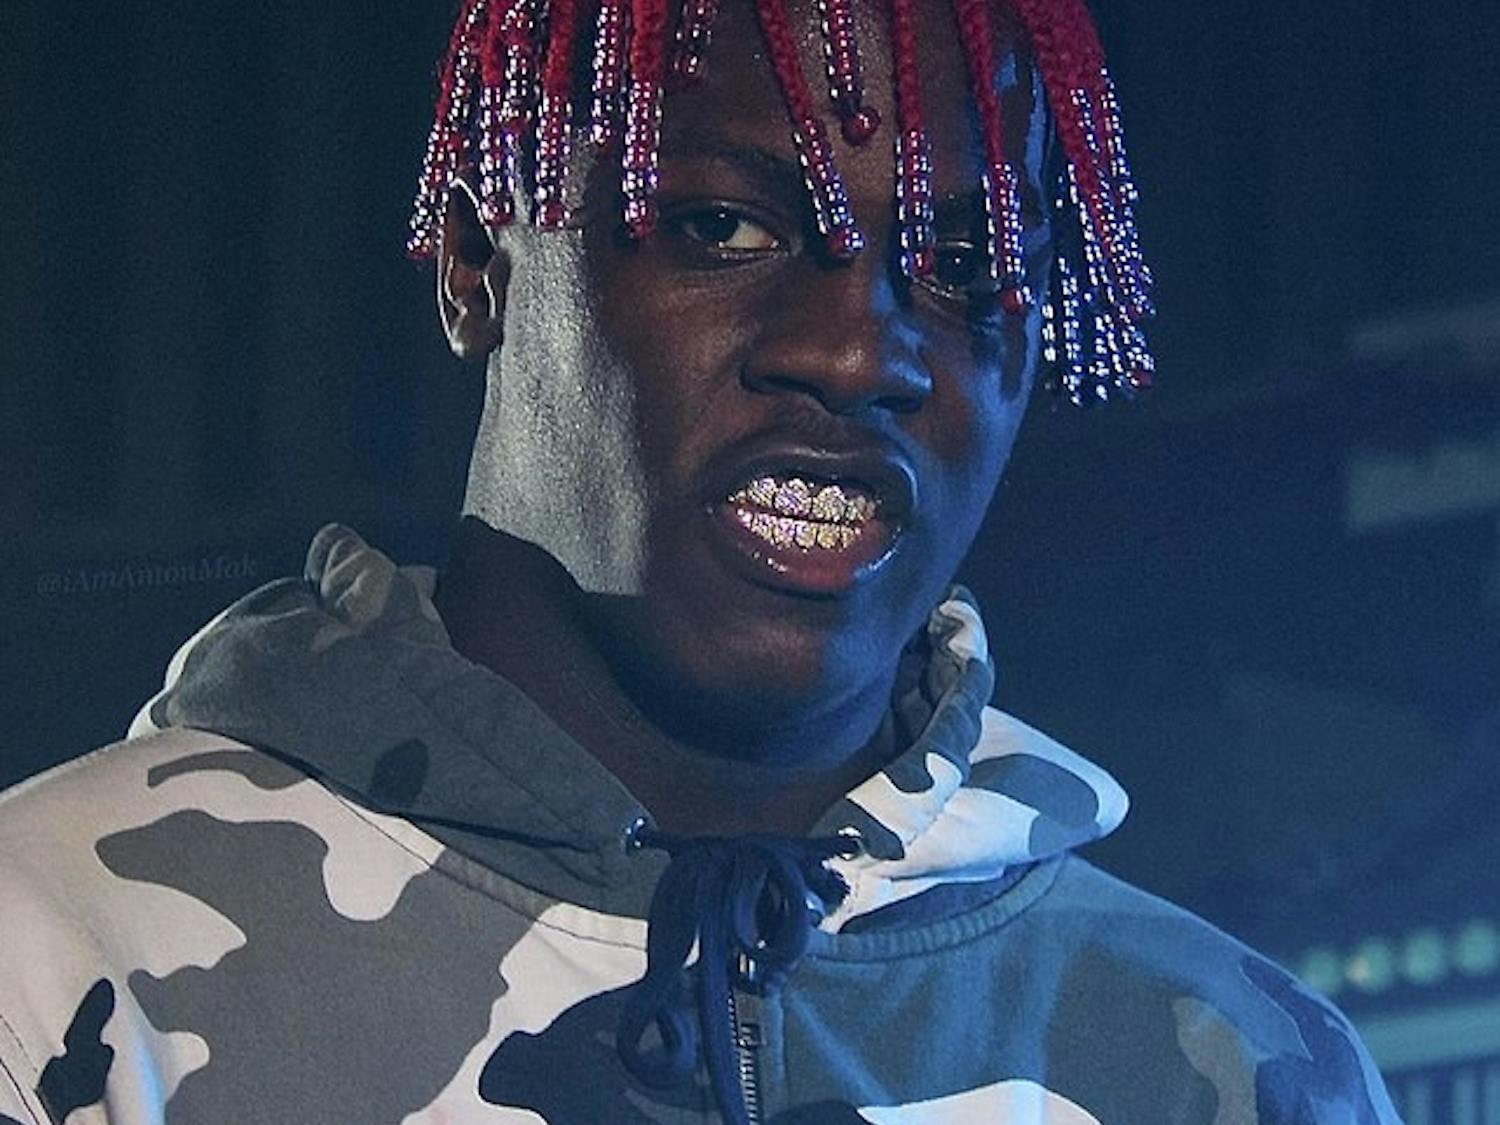 Grammy-nominated artist Lil Yachty will perform at Springfest alongside fellow rappers Coi Leray and &nbsp;Cordae.&nbsp;